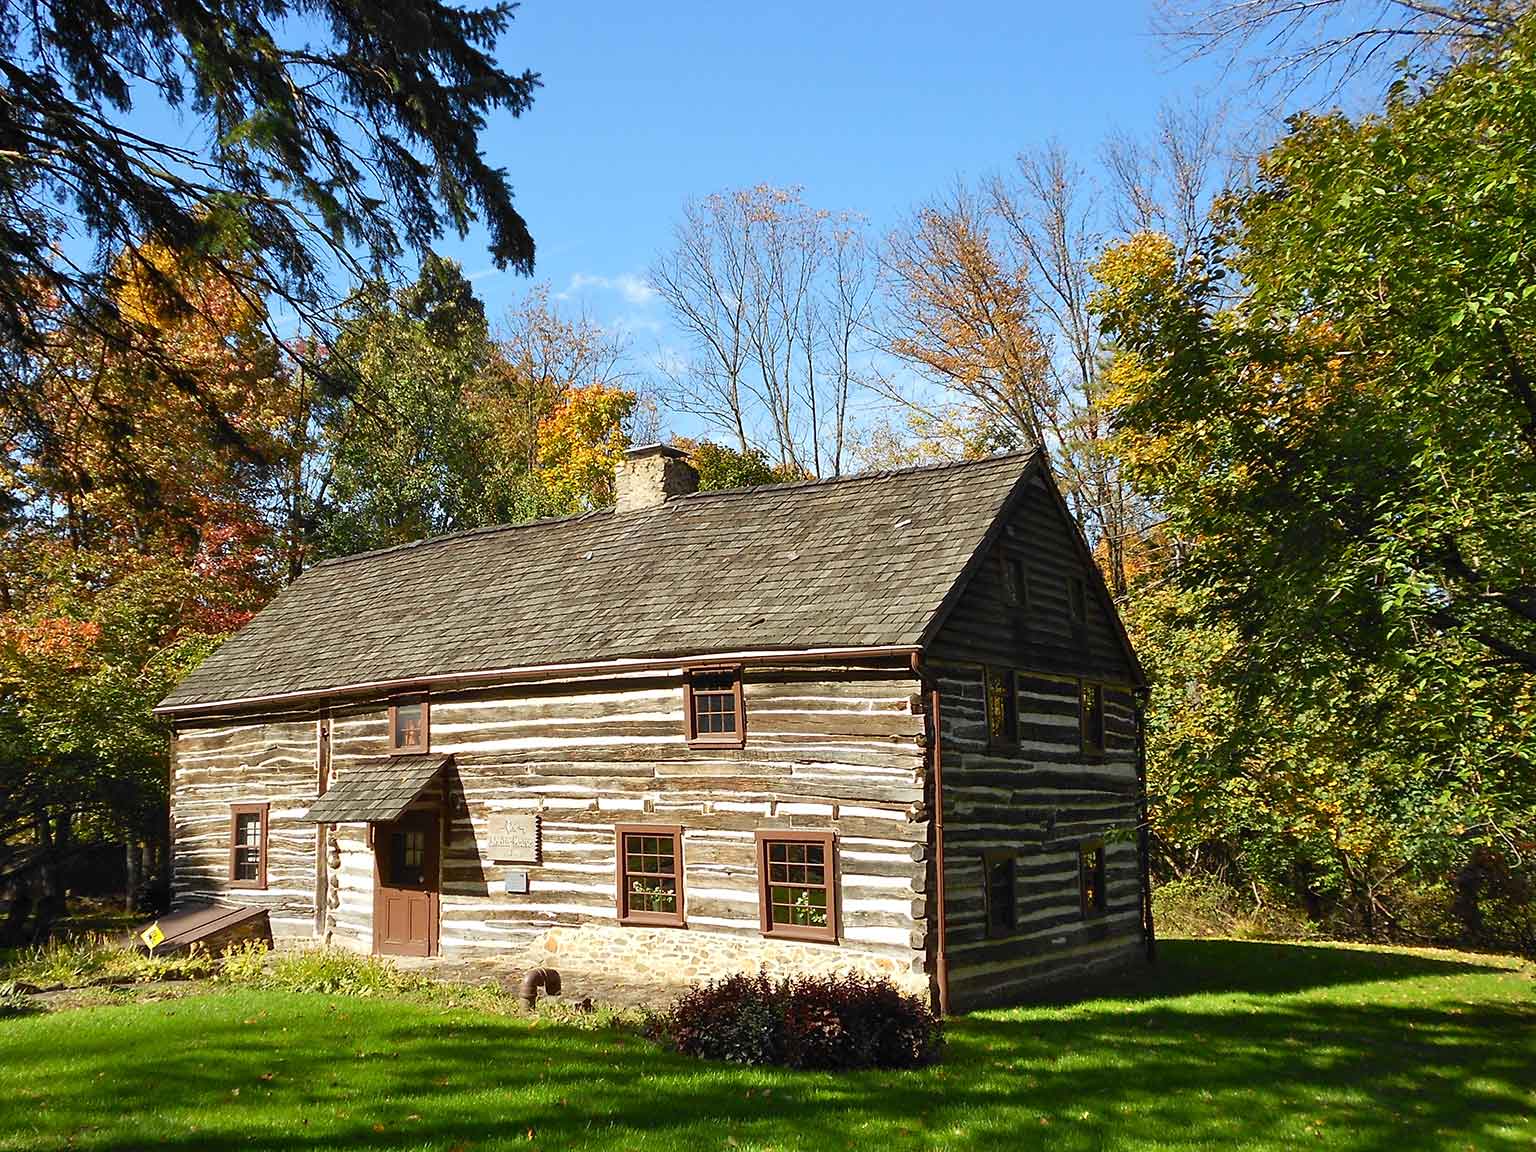 Shelter House in Emmaus, Pennsylvania, constructed in 1734 by Pennsylvania Dutch settlers